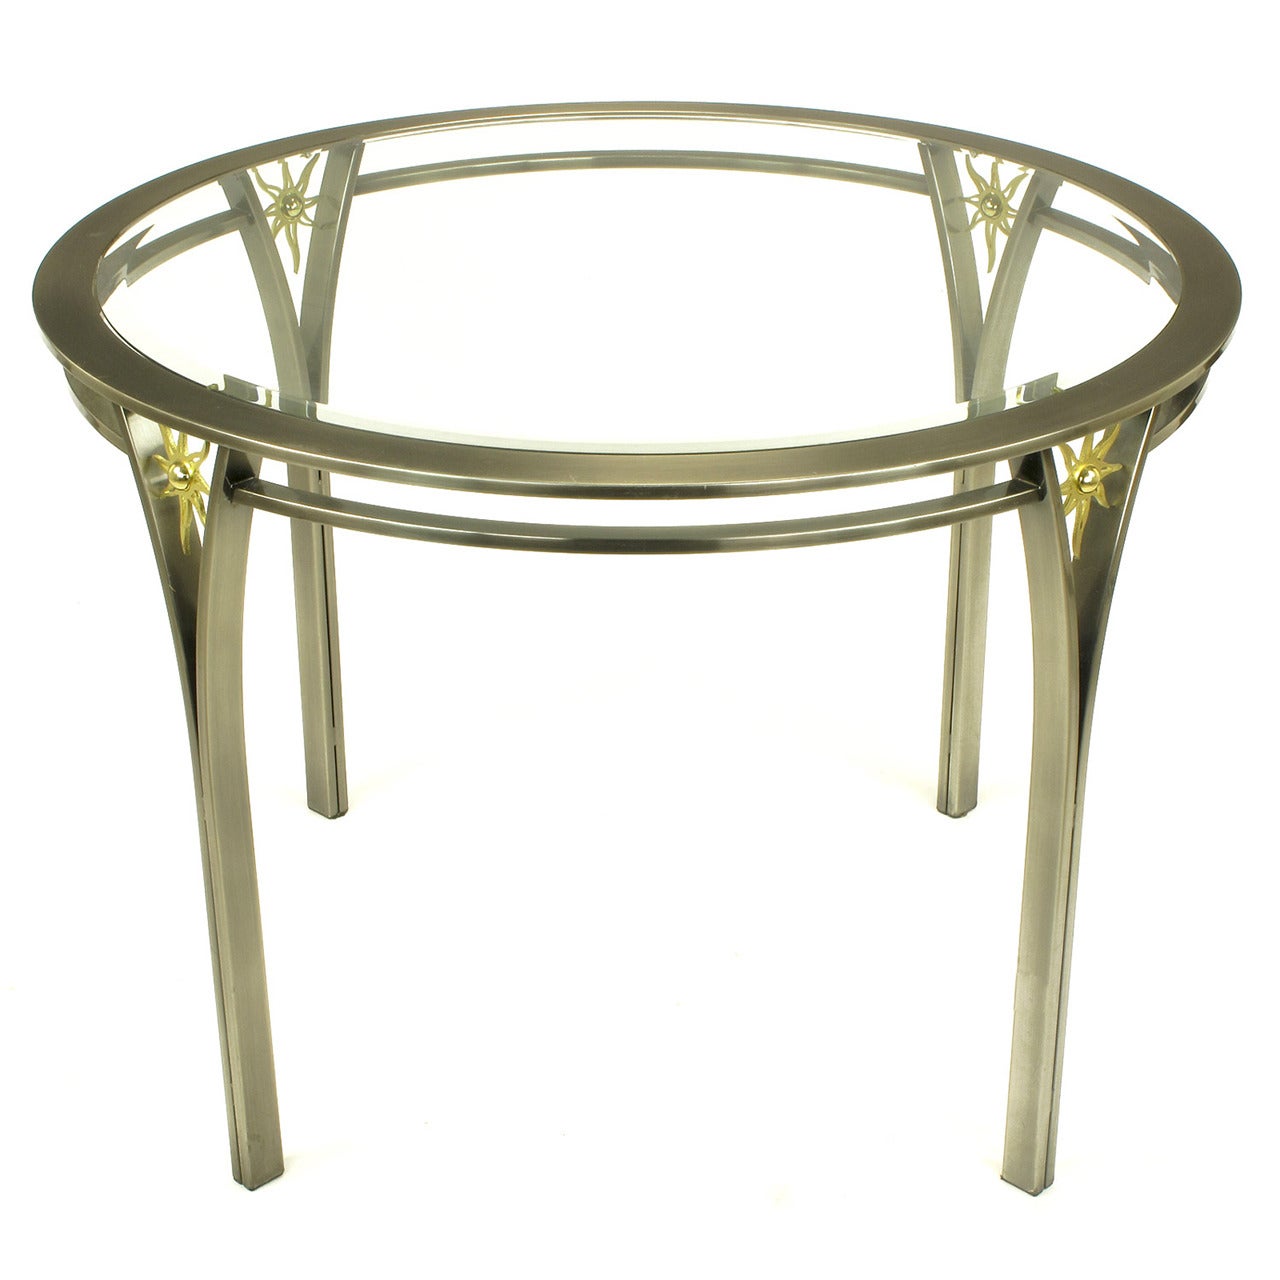 DIA Round Brushed Steel and Brass Sunburst Dining Table